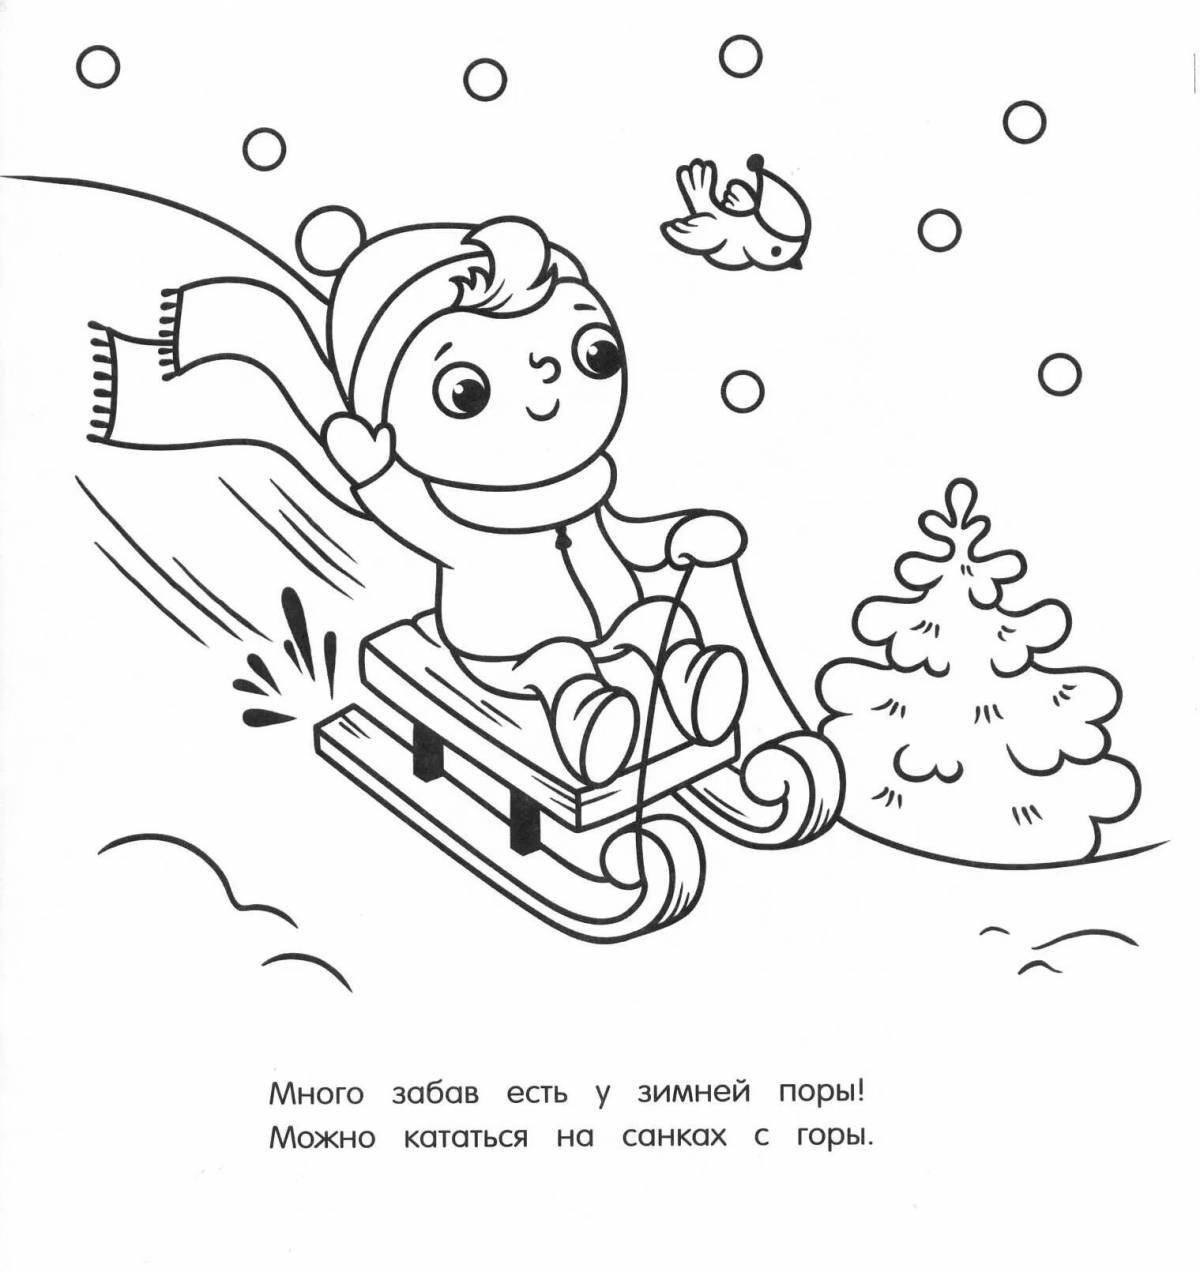 Adorable winter traffic rules coloring book